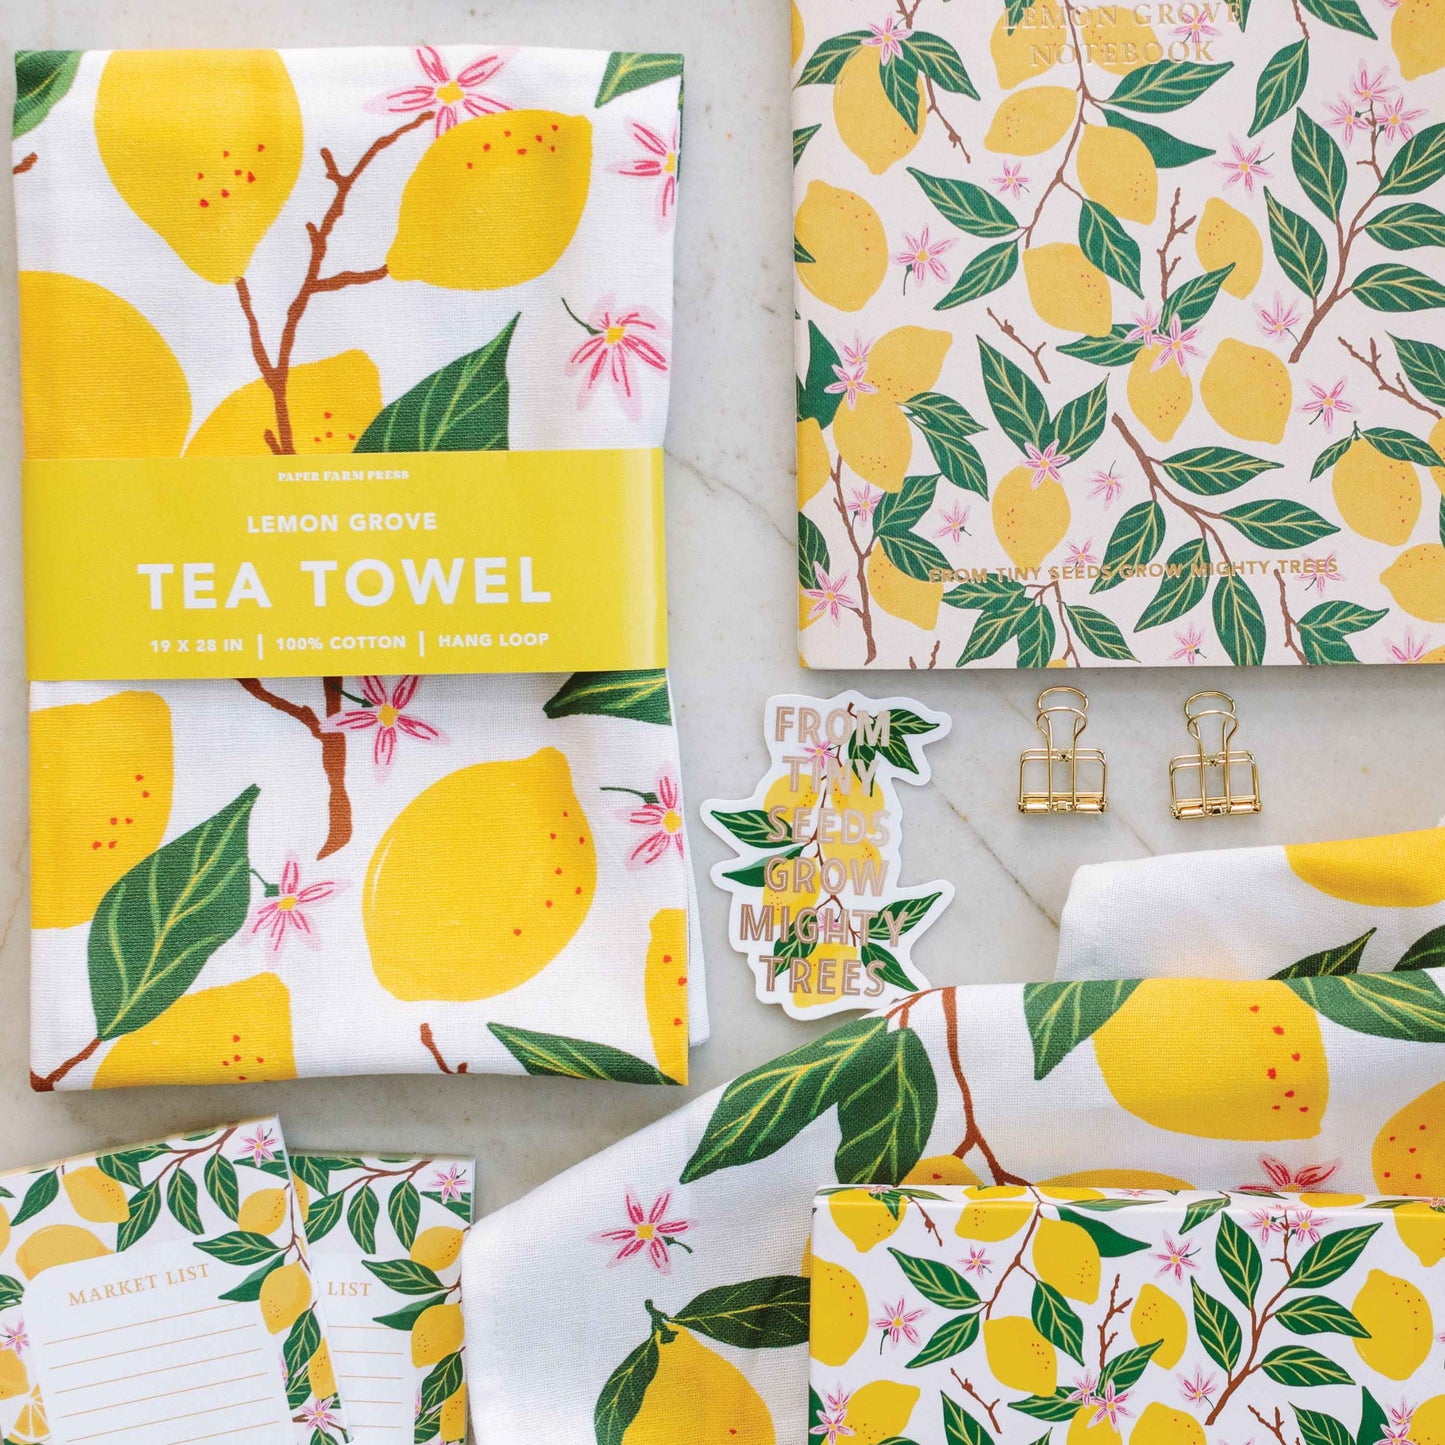 Tea towel, stickers, notepad, wrapping paper in lemon grove print